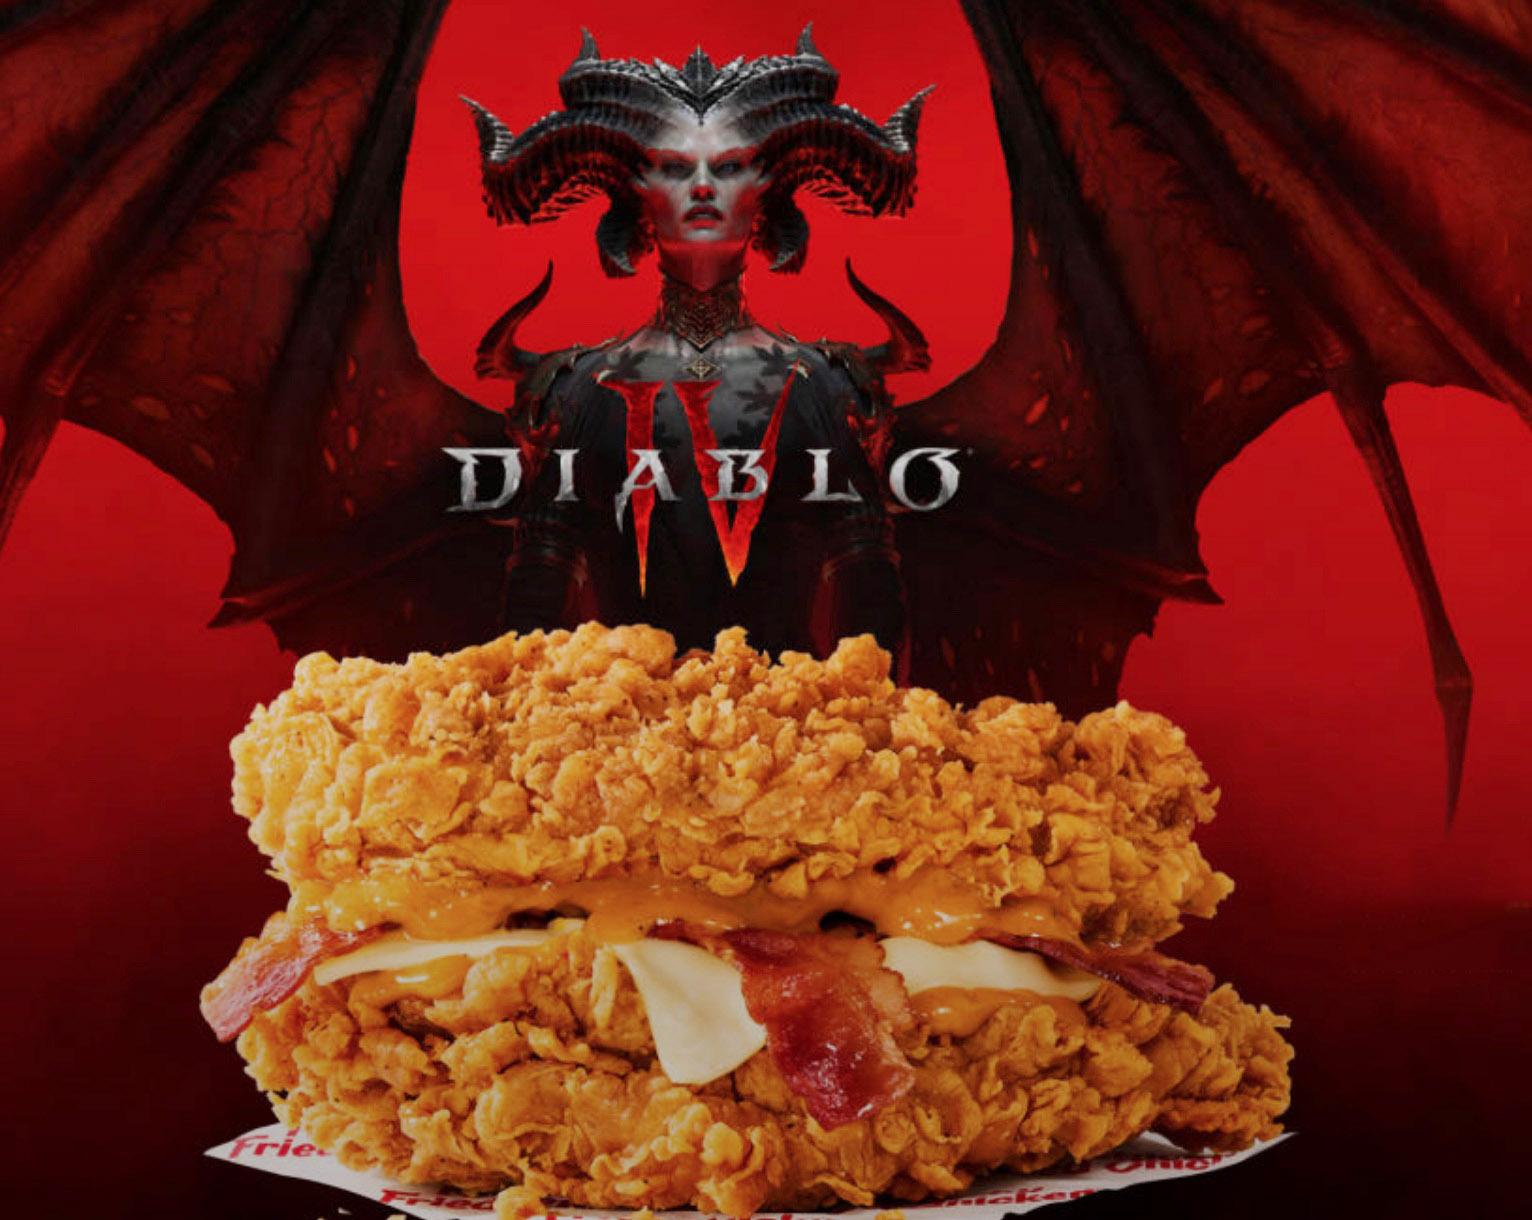 Free Diablo IV Early Beta Access with KFC Sandwich Purchase